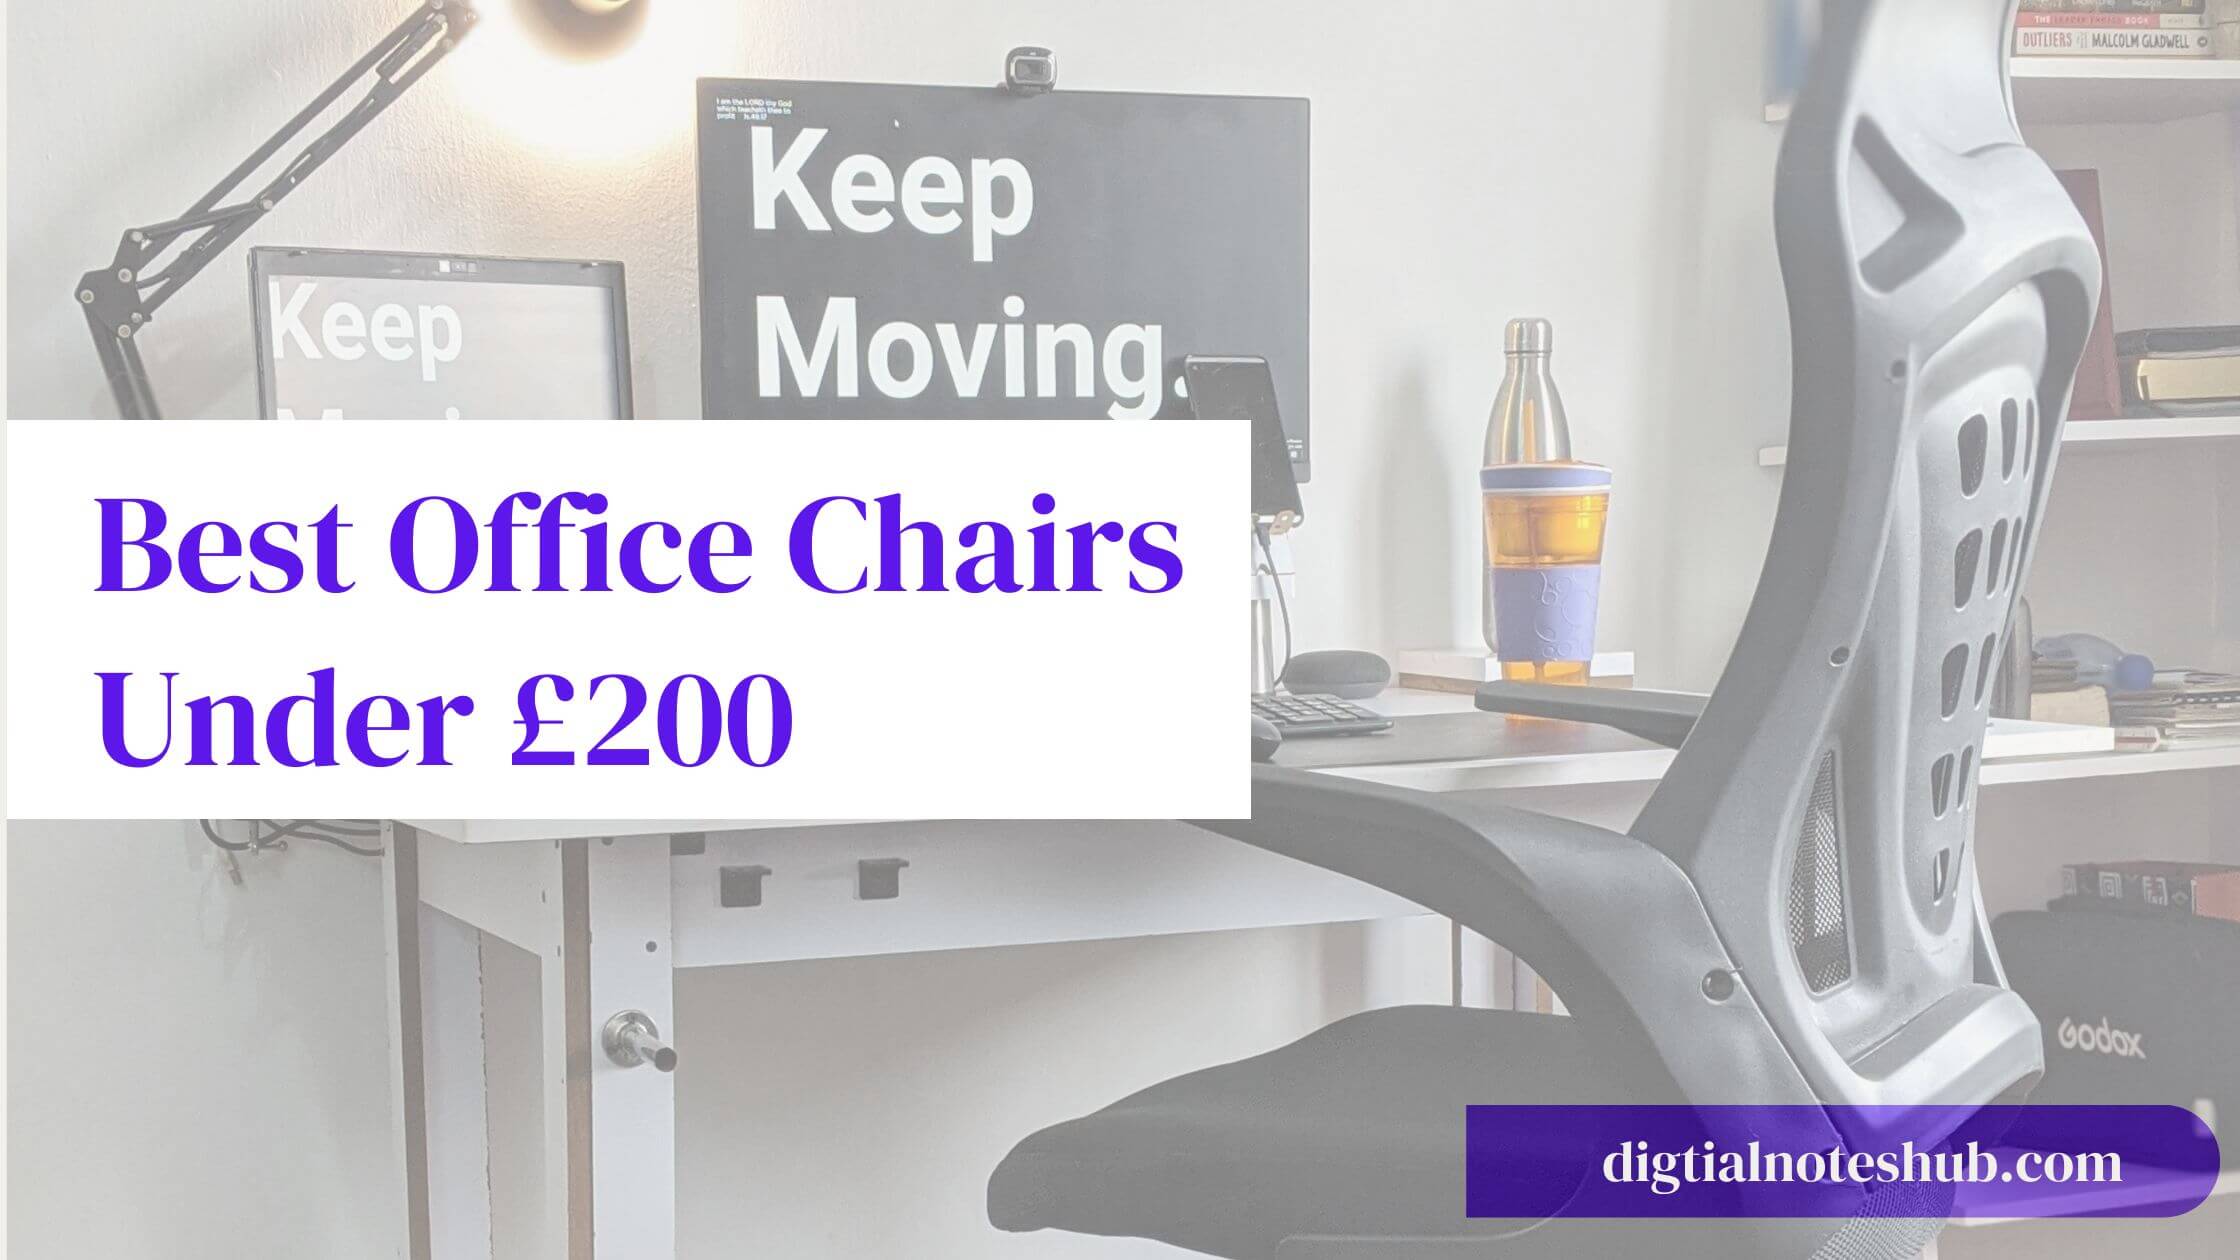 best office chair under £200 uk pounds